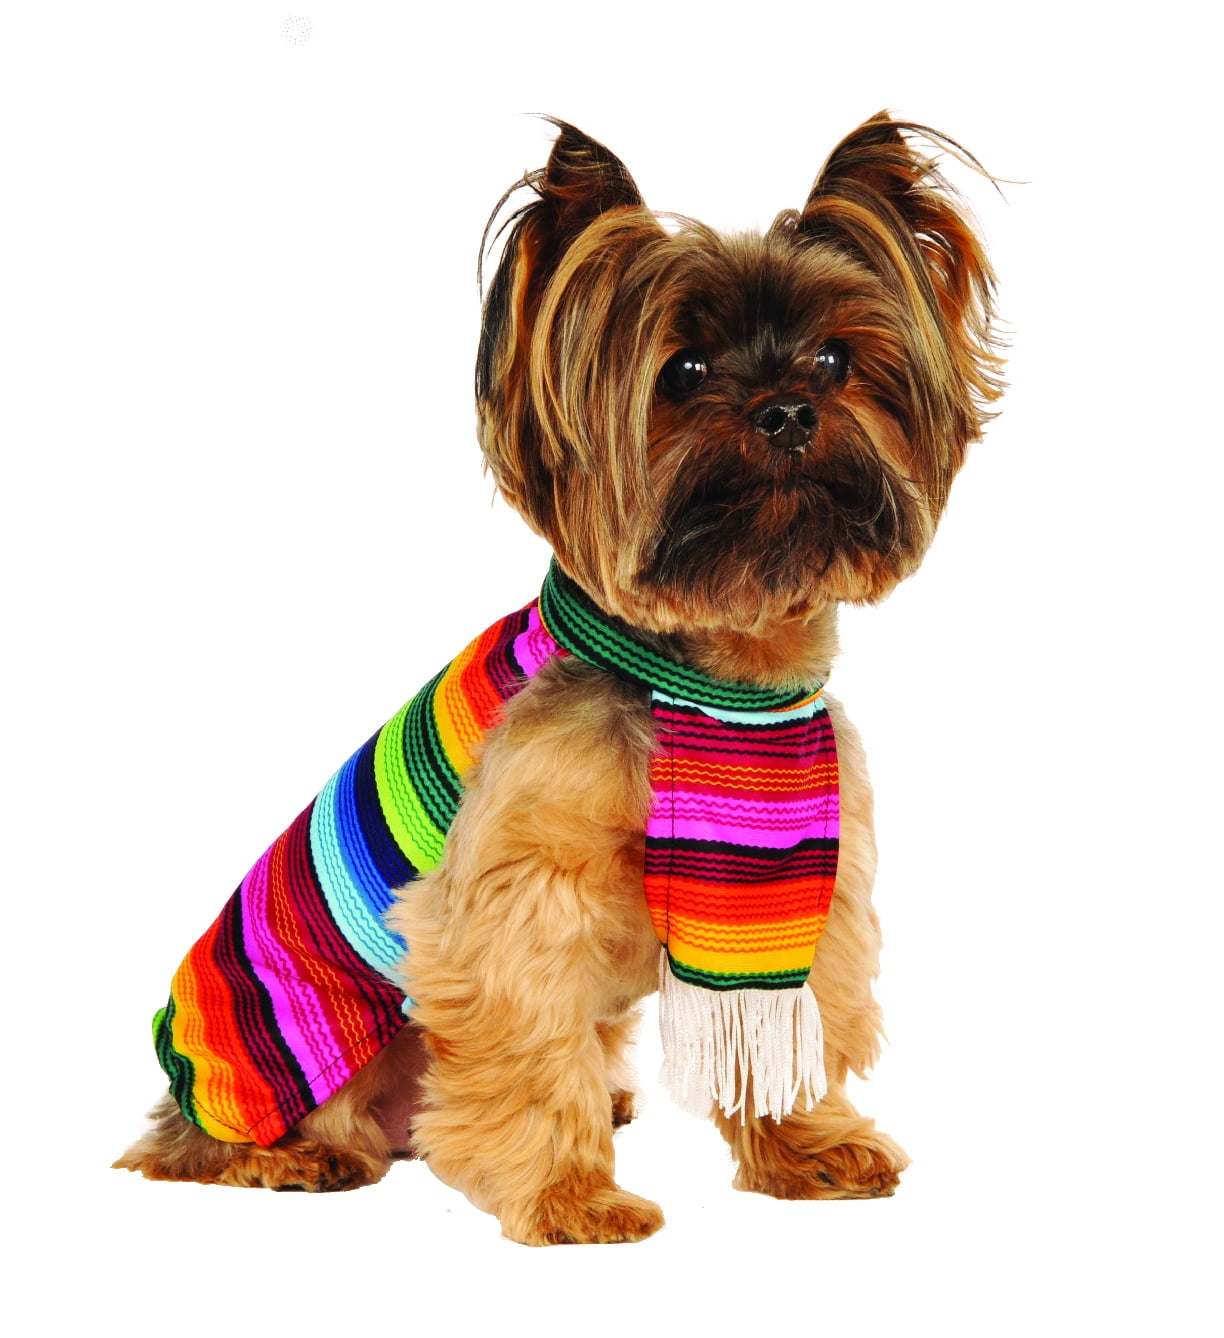 Didog Mexican Serape Blanket Dog Poncho for Small Dogs & Cats Fleece Lined Warm Winter Coat Cat Apparel for Halloween Costume Christmas Outfit